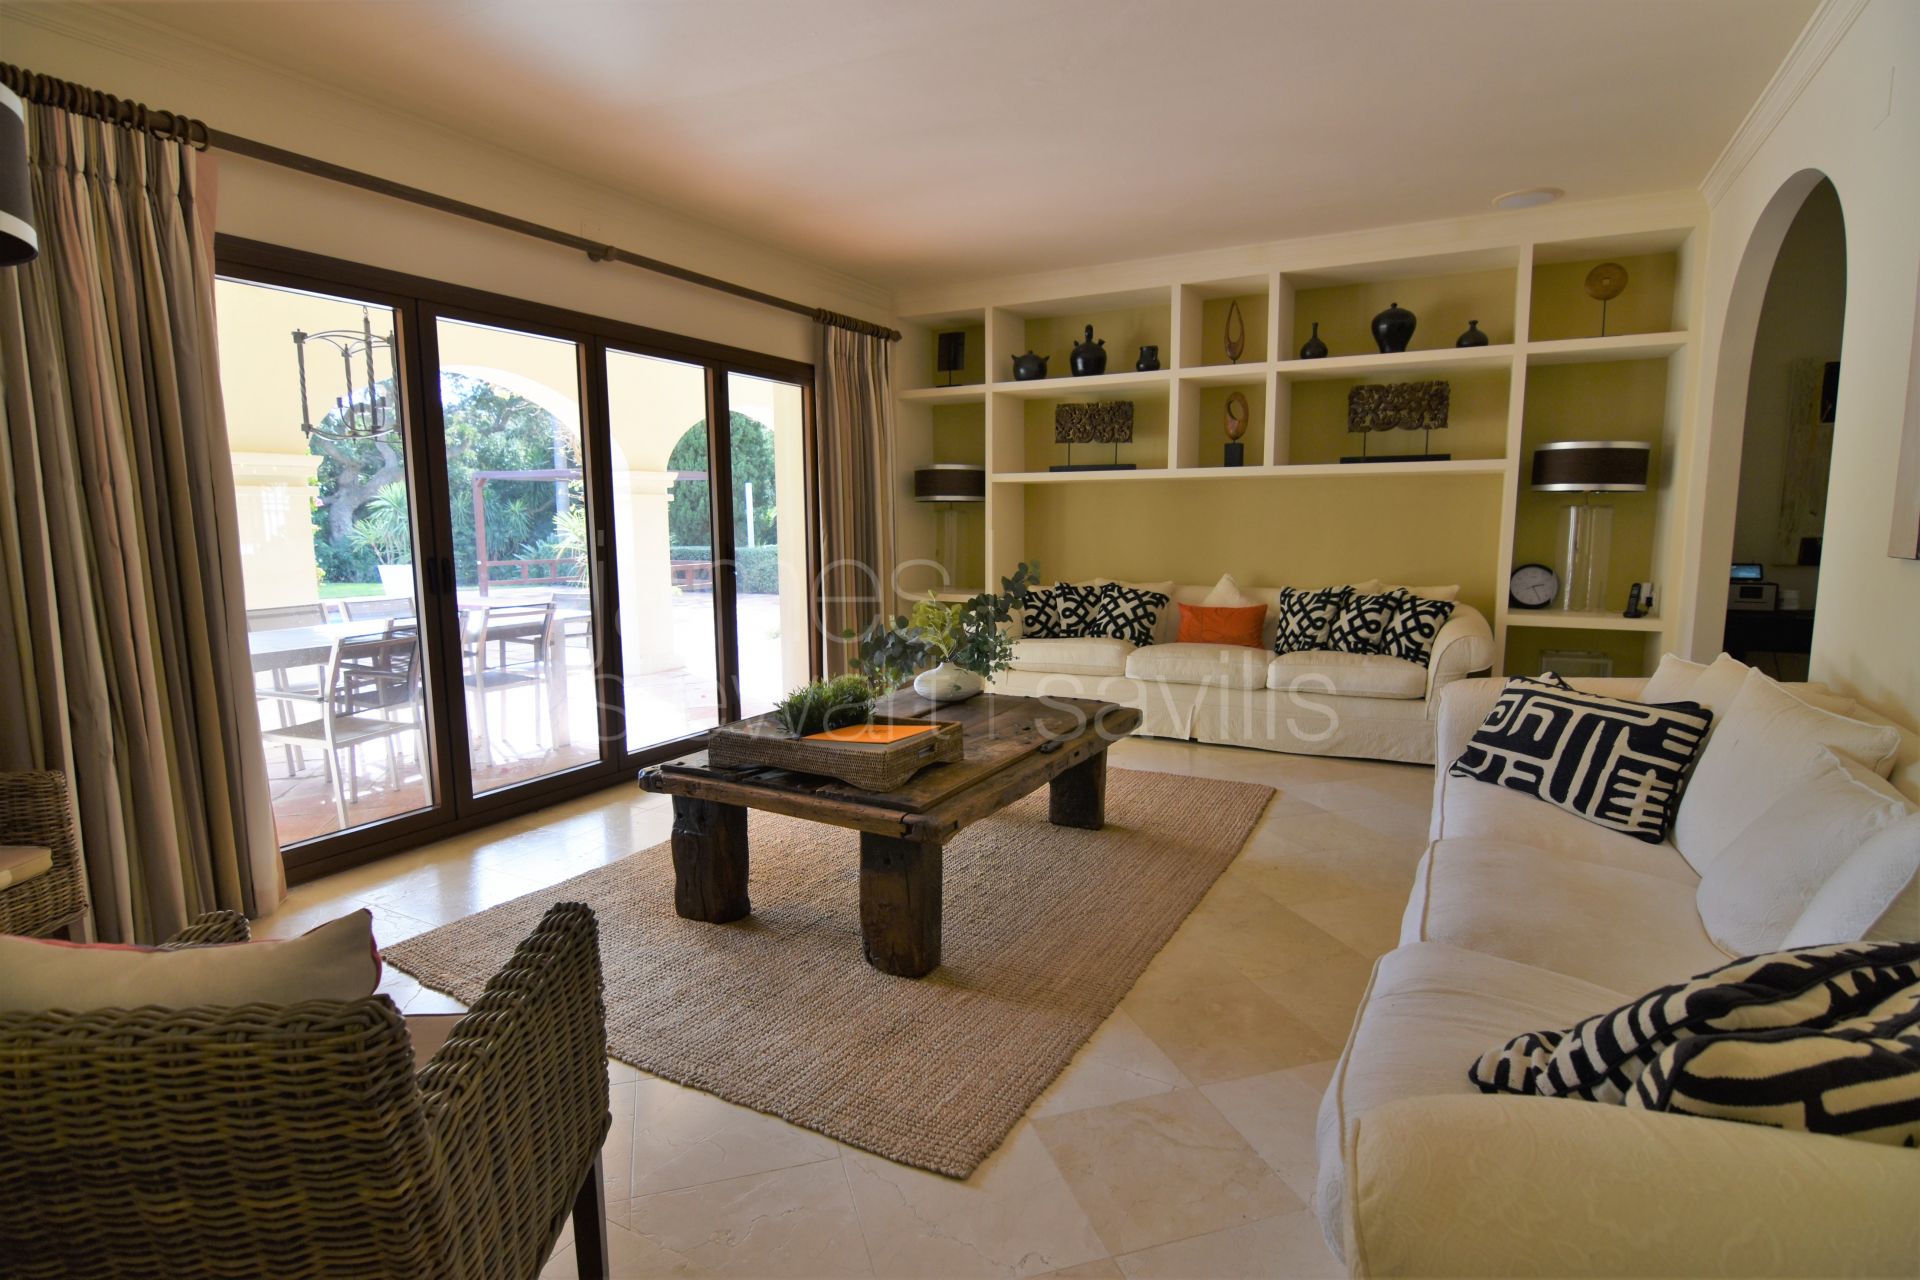 Spacious villa in a mature area with a beautiful outdoor area